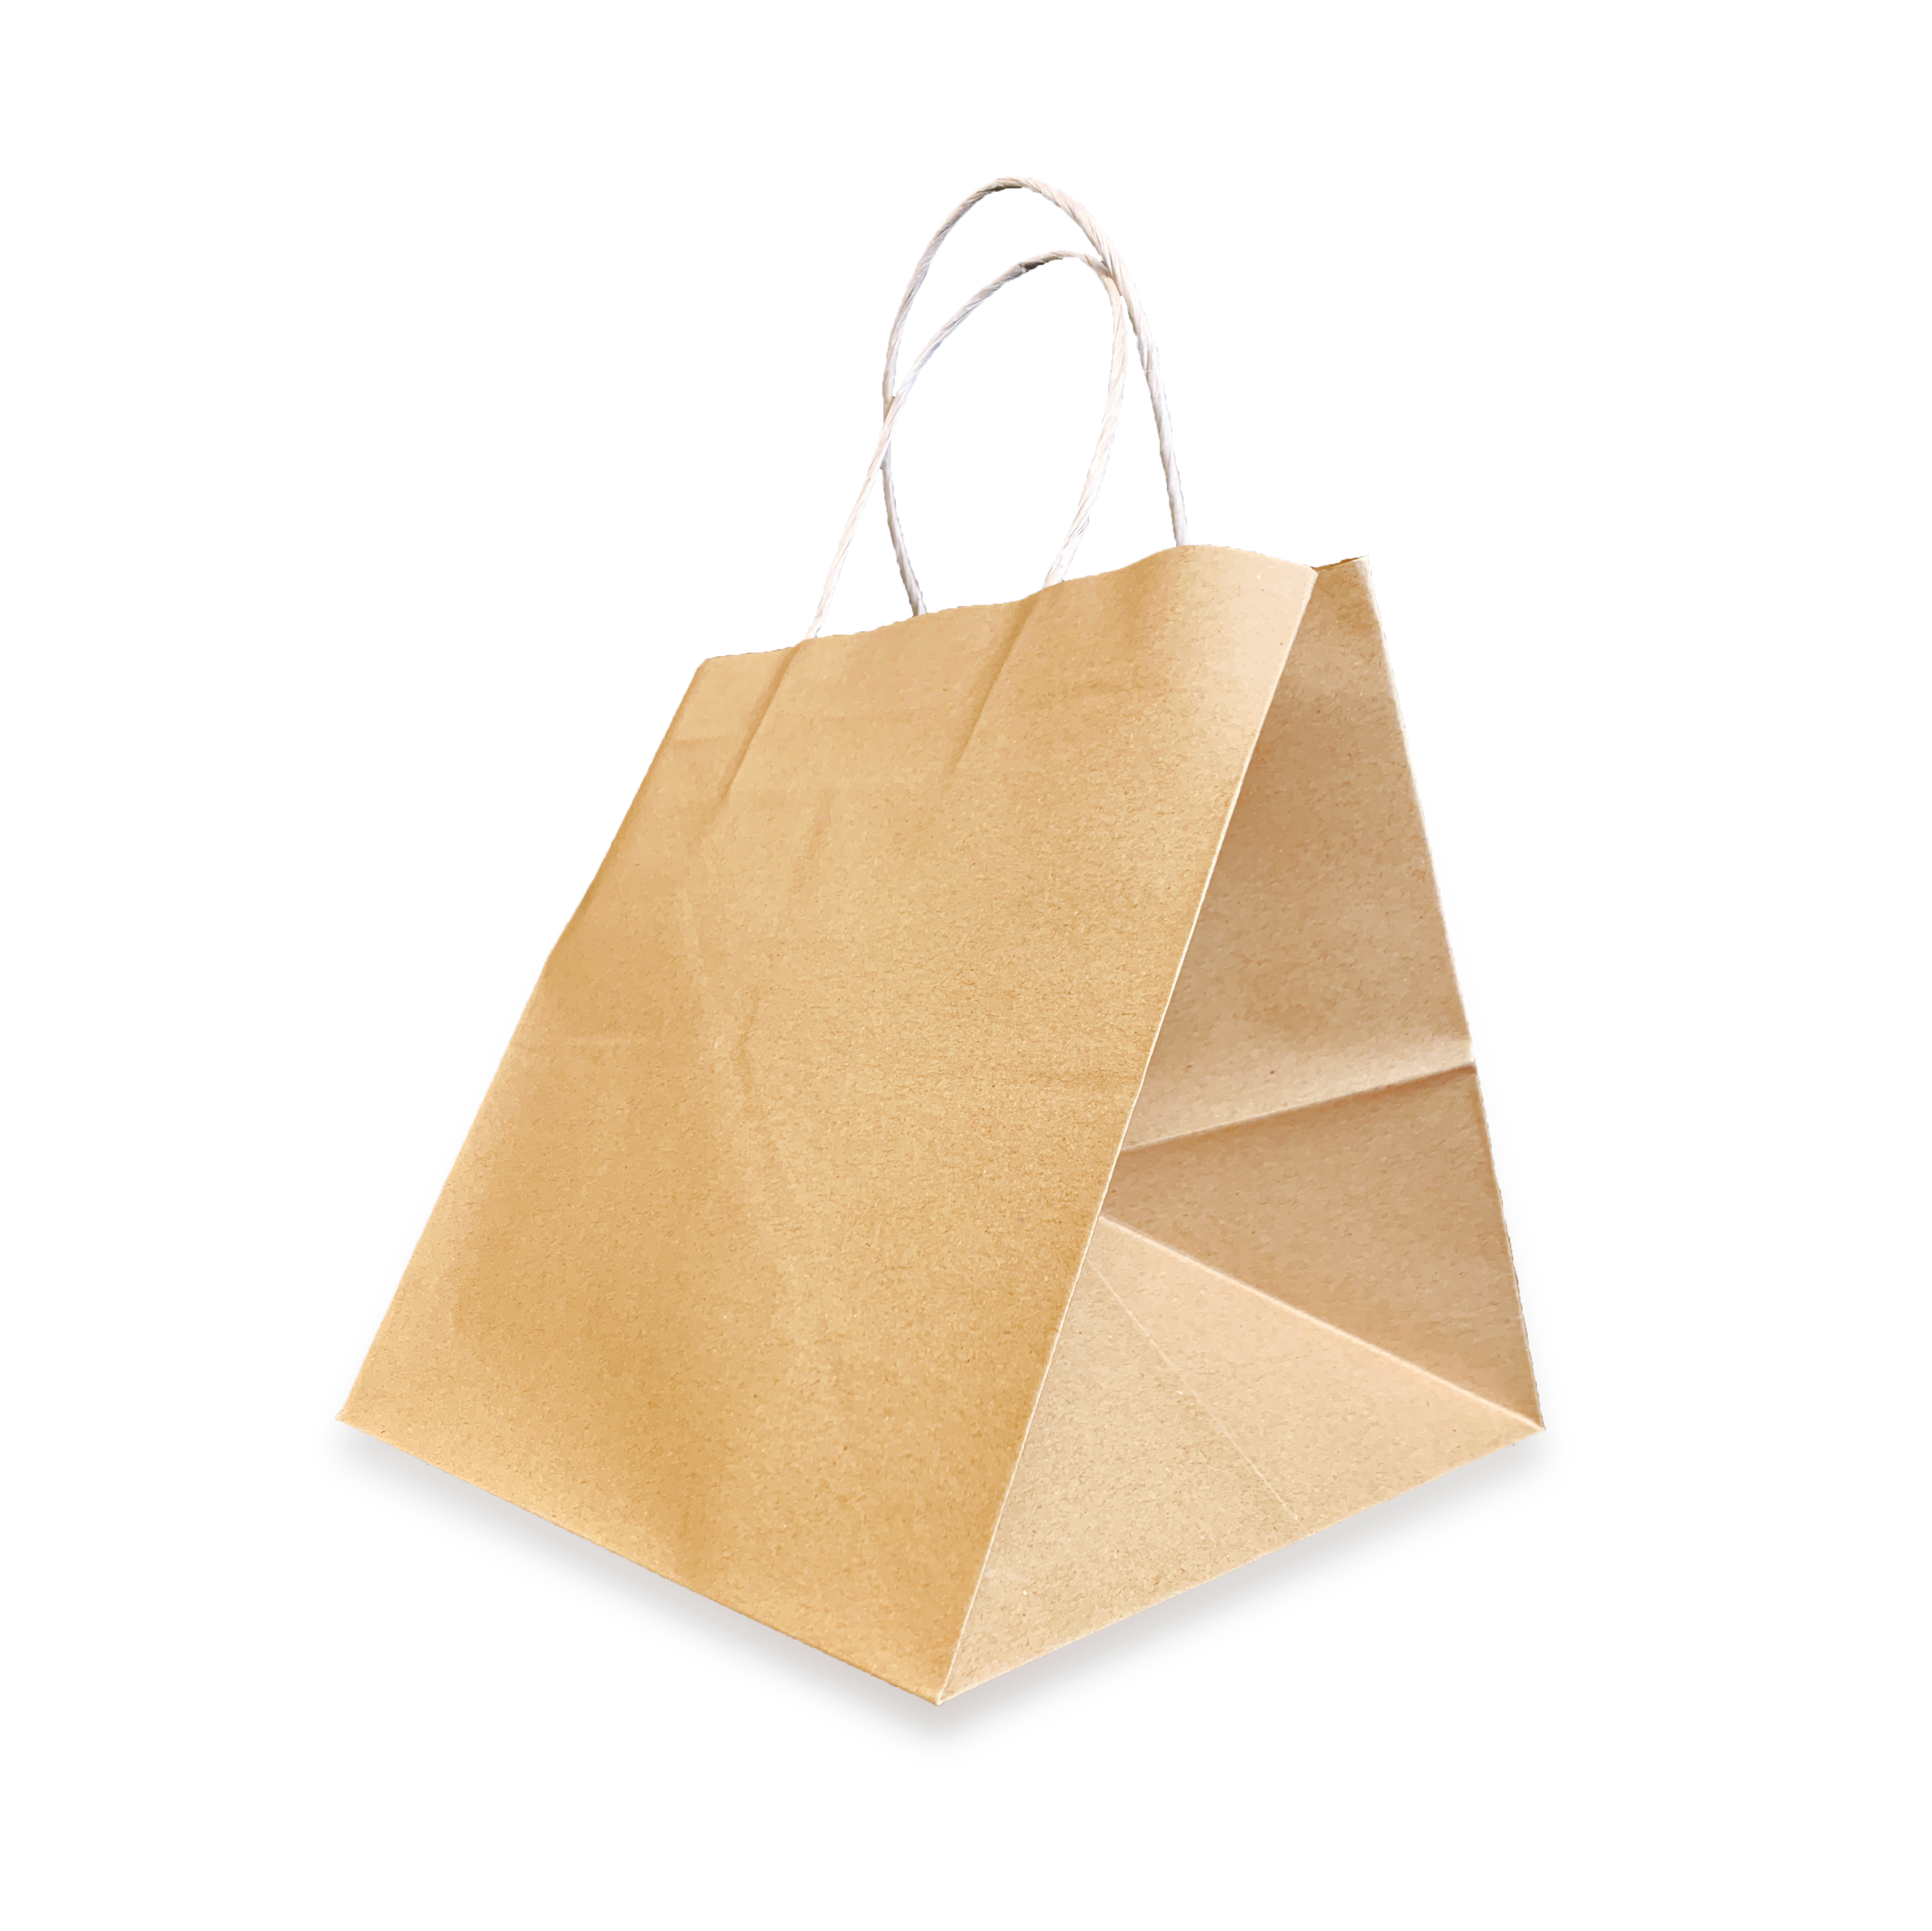 10x10x10 Uncoated Natural Kraft Stock Bag 